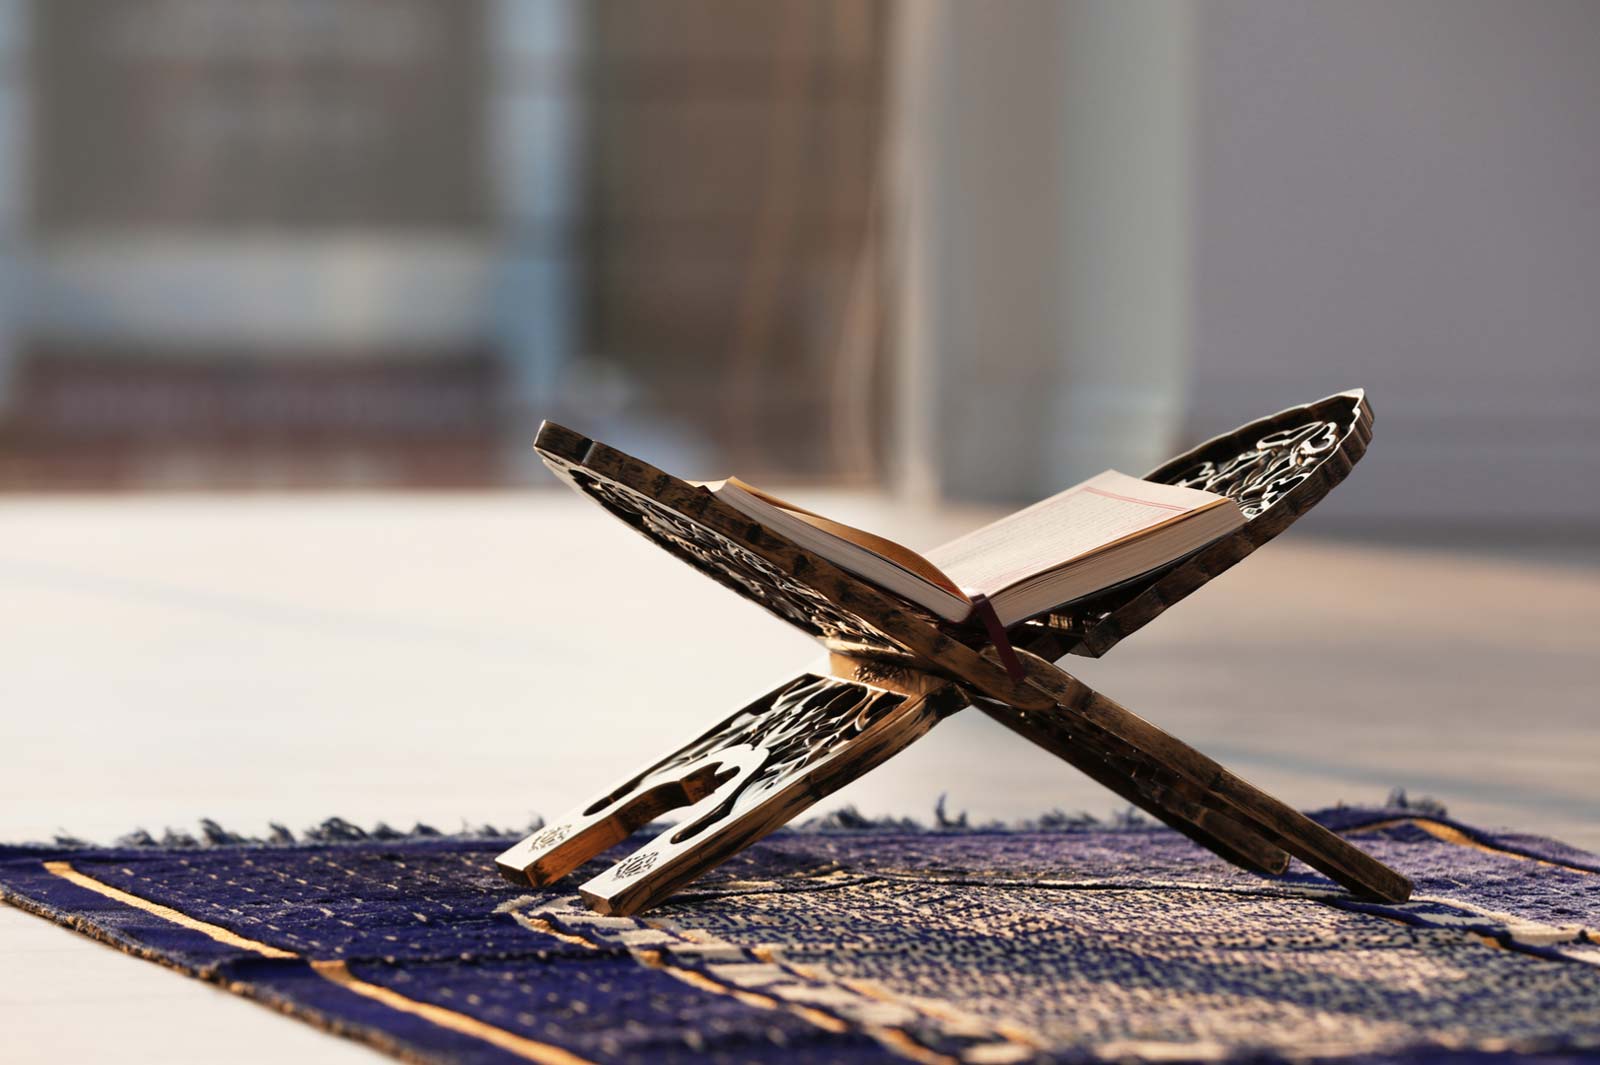 15 Posts to Improve Your Relation with Quran in Ramadan